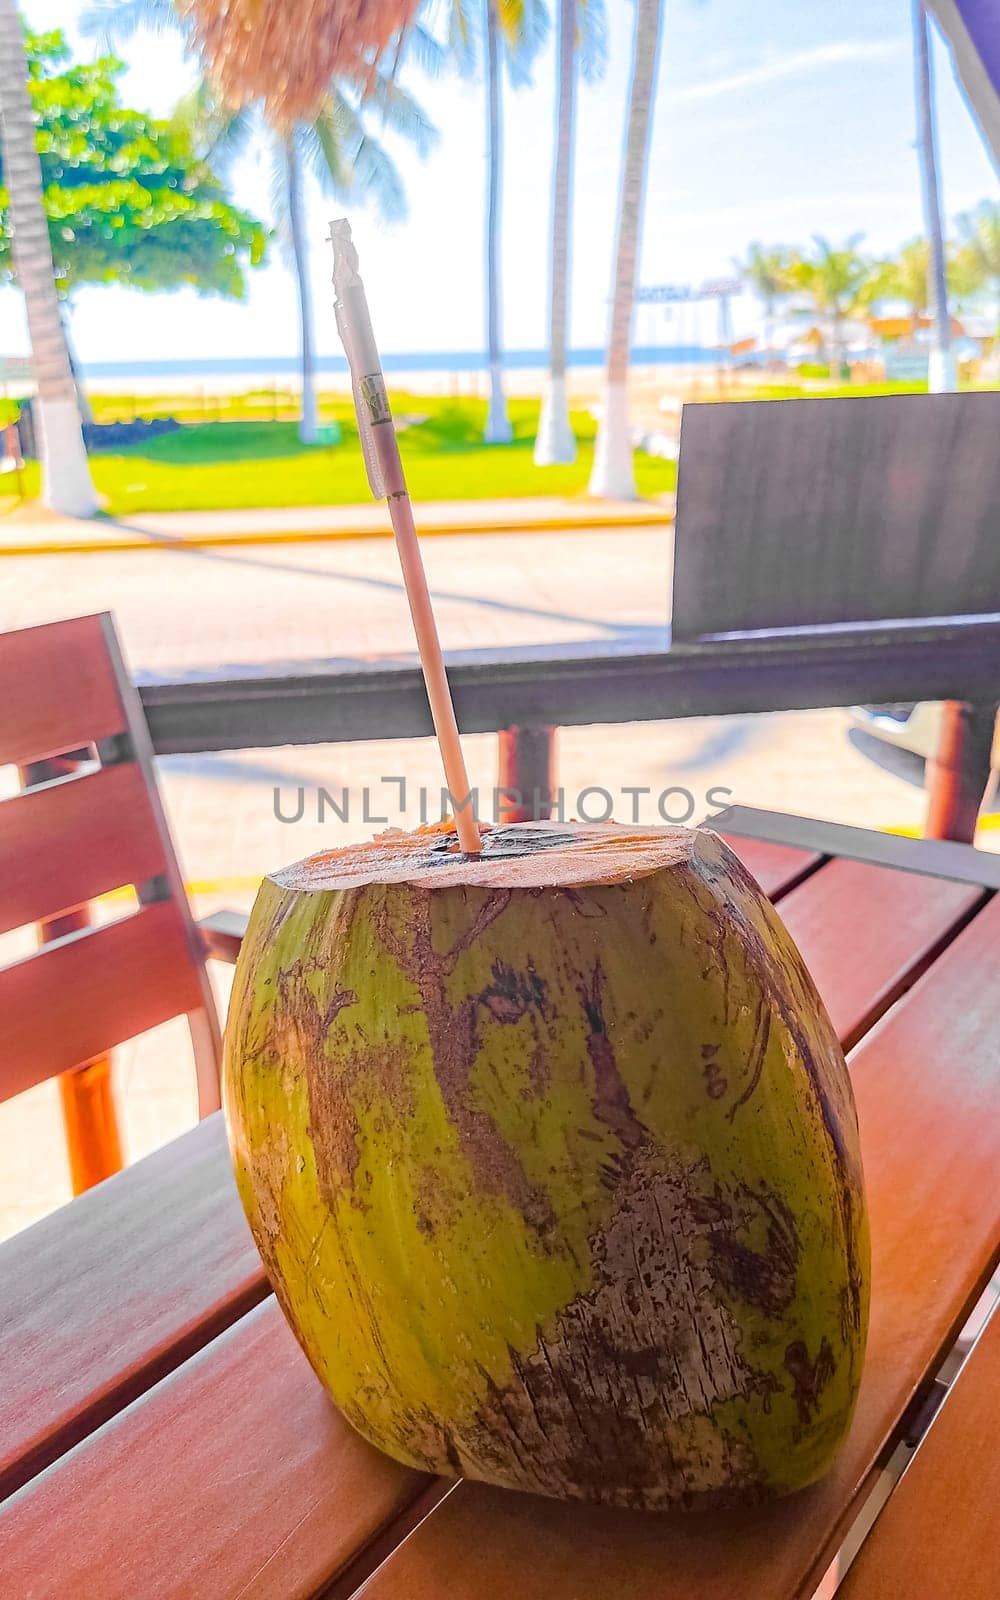 Tropical coconut with straw on the table Puerto Escondido Mexico. by Arkadij